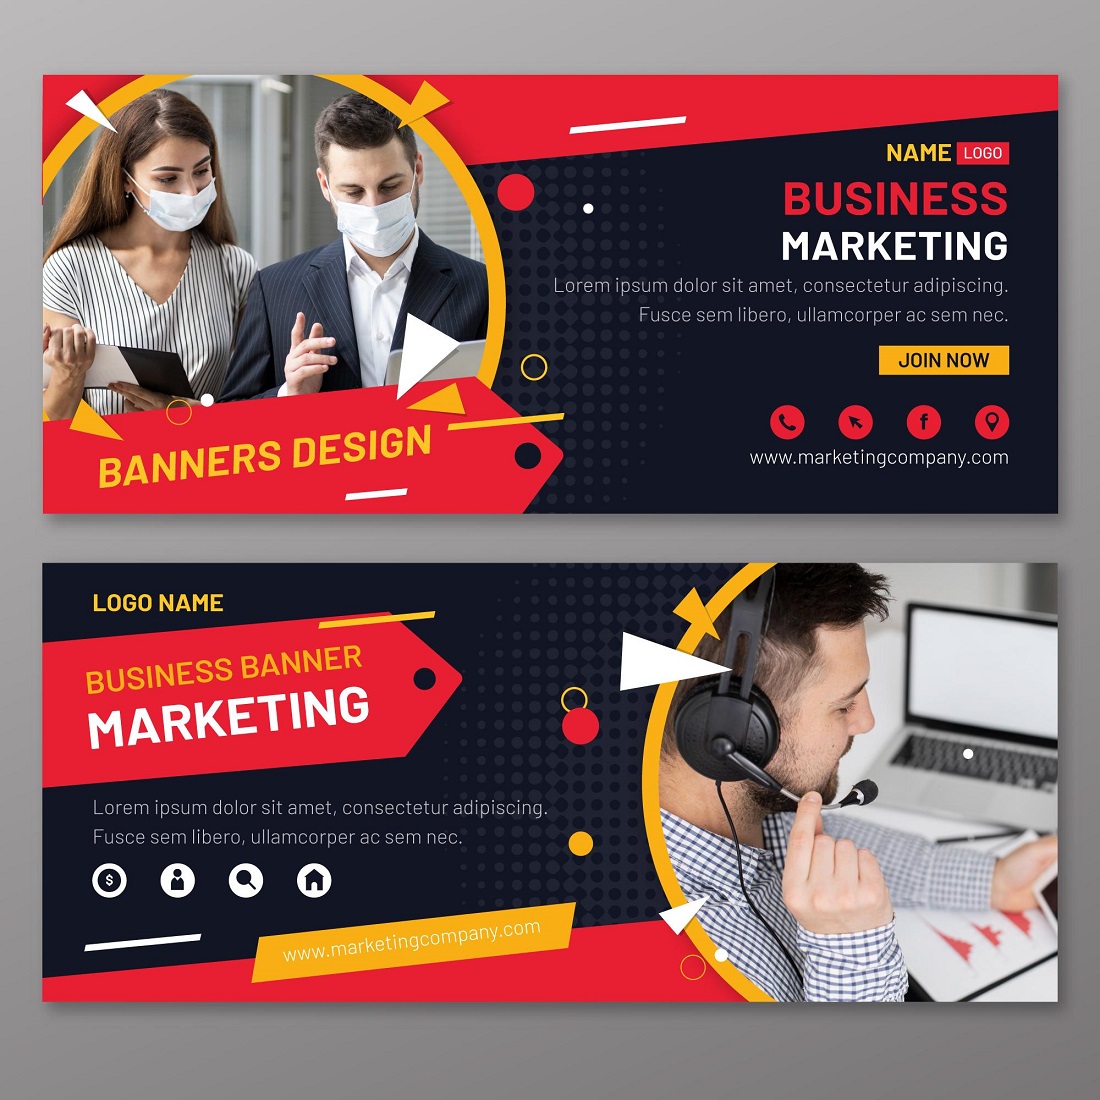 Marketing banners template cover image.